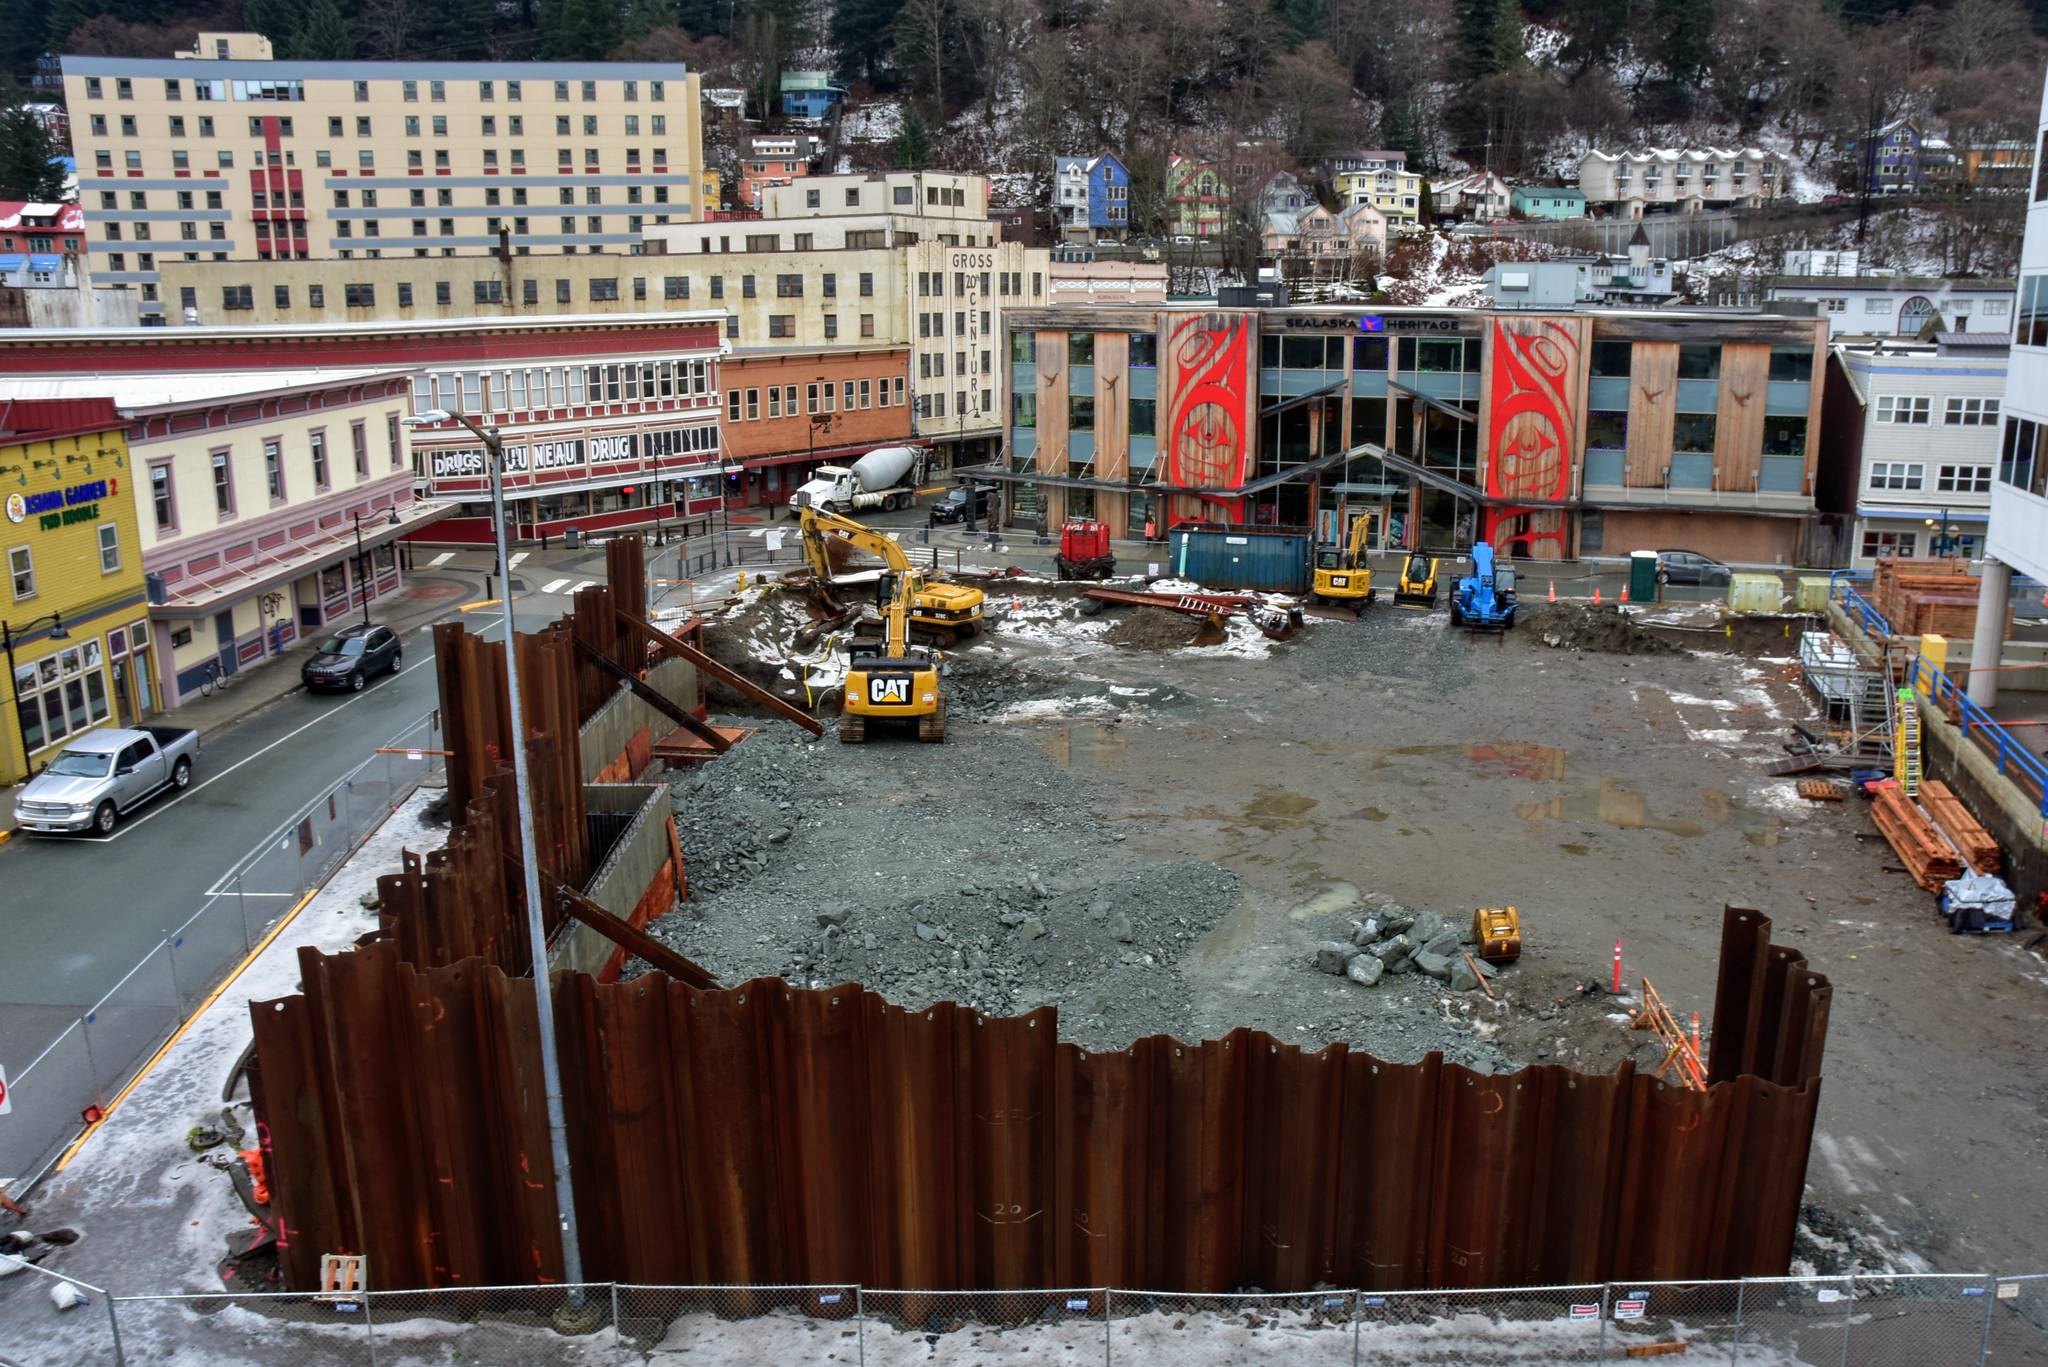 Construction on Sealaska Heritage Institute's arts campus, seen here on Tuesday, Nov. 24, 2020, in downtown Juneau ran into complications when contaminated soil was discovered at the site. The City and Borough of Juneau Assembly approved $1.5 million in funding for the campus. (Peter Segall / Juneau Empire)